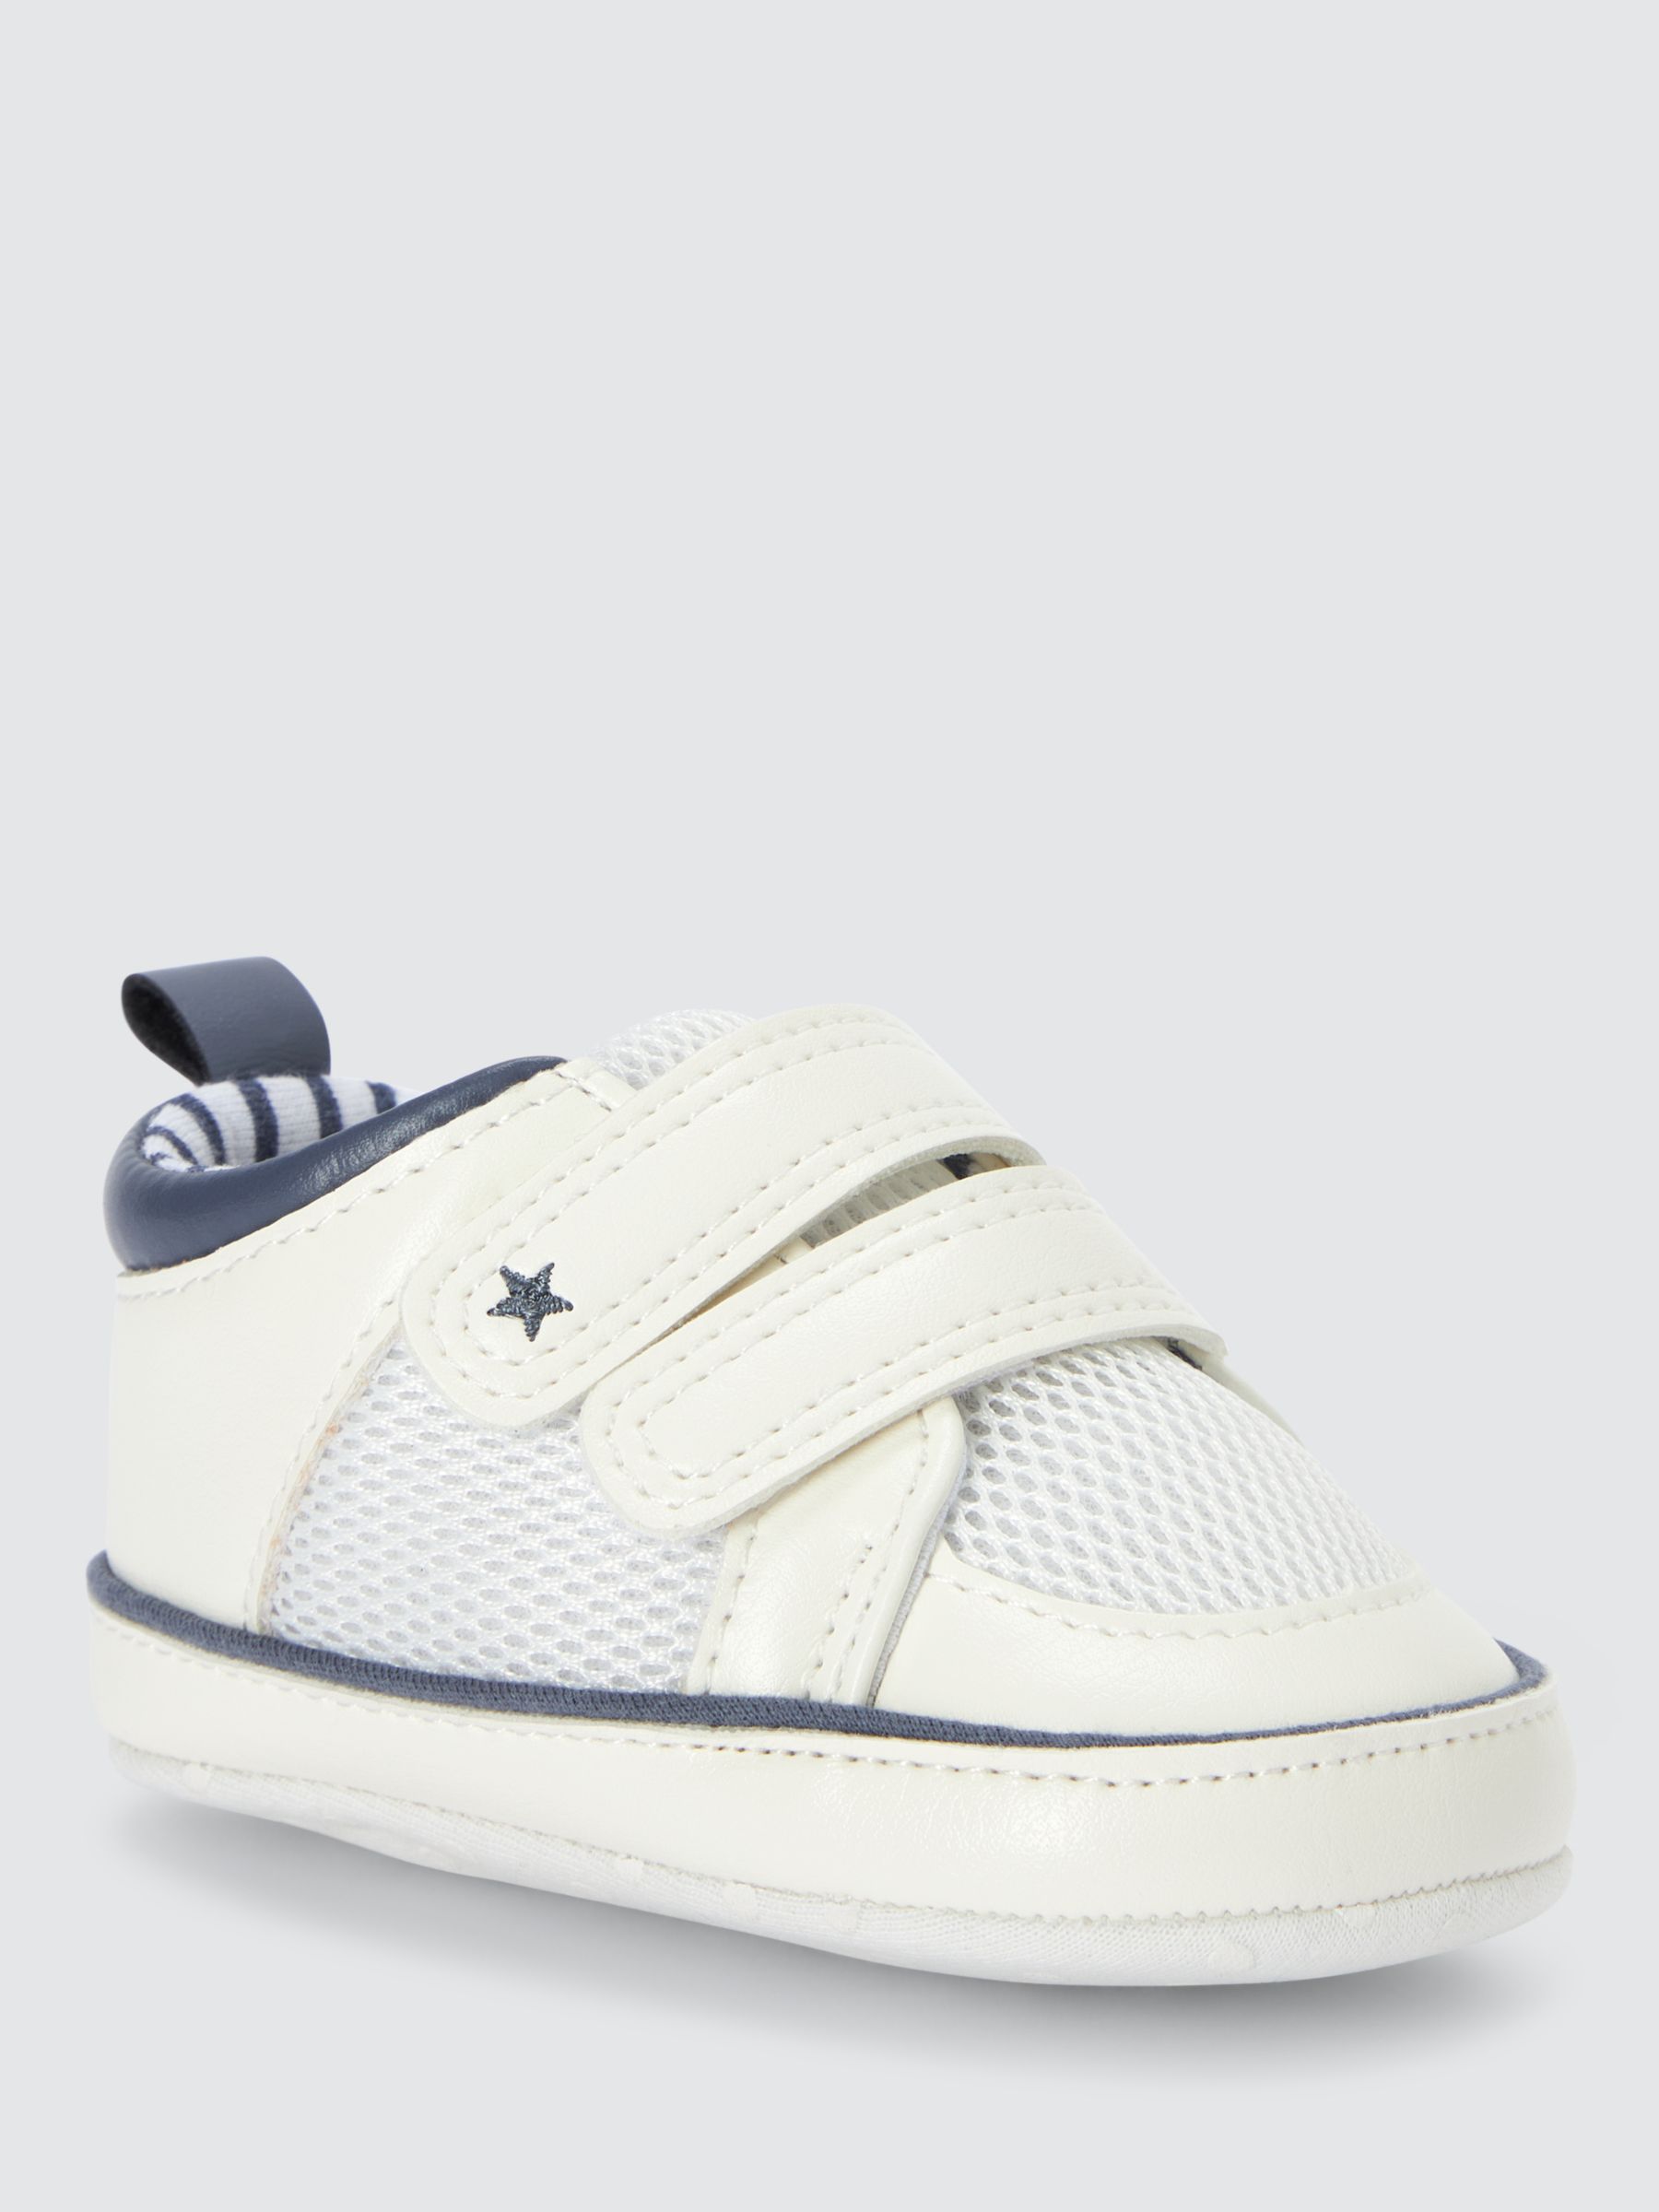 John Lewis Baby Star Trainer Booties, White, 6-12 months